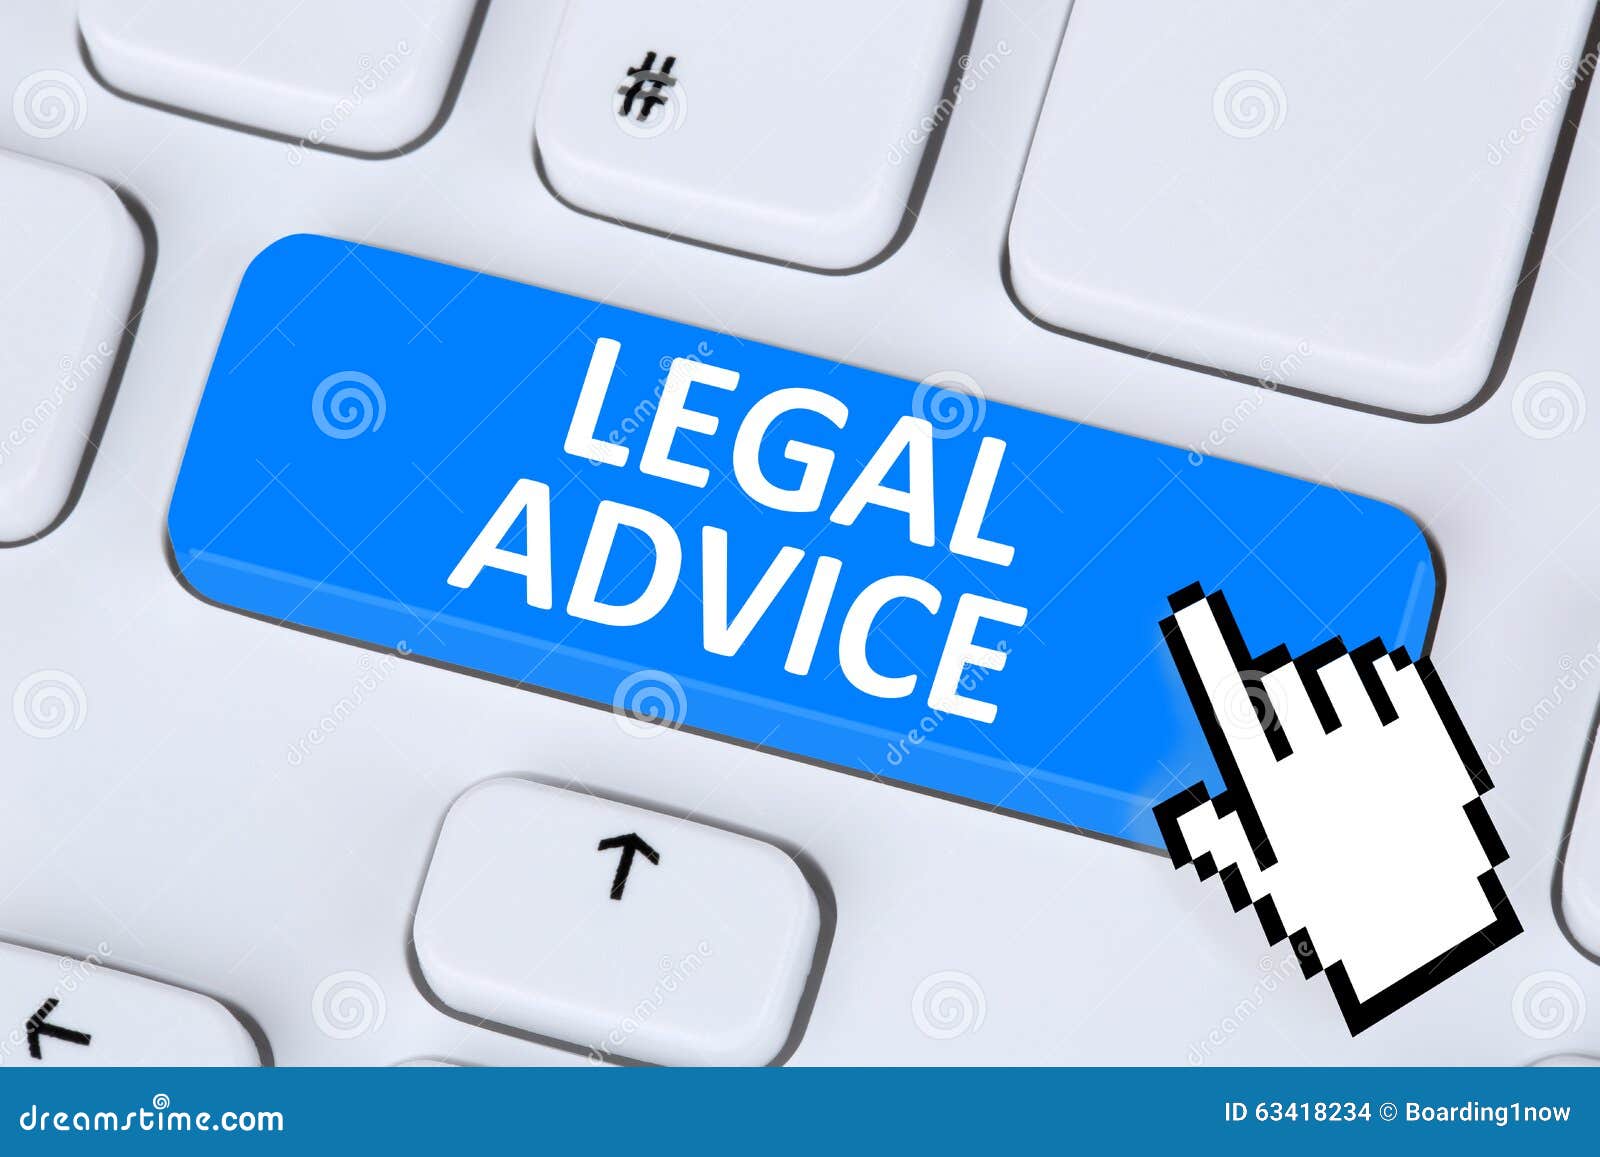 legal advice compliance consultation information info company on